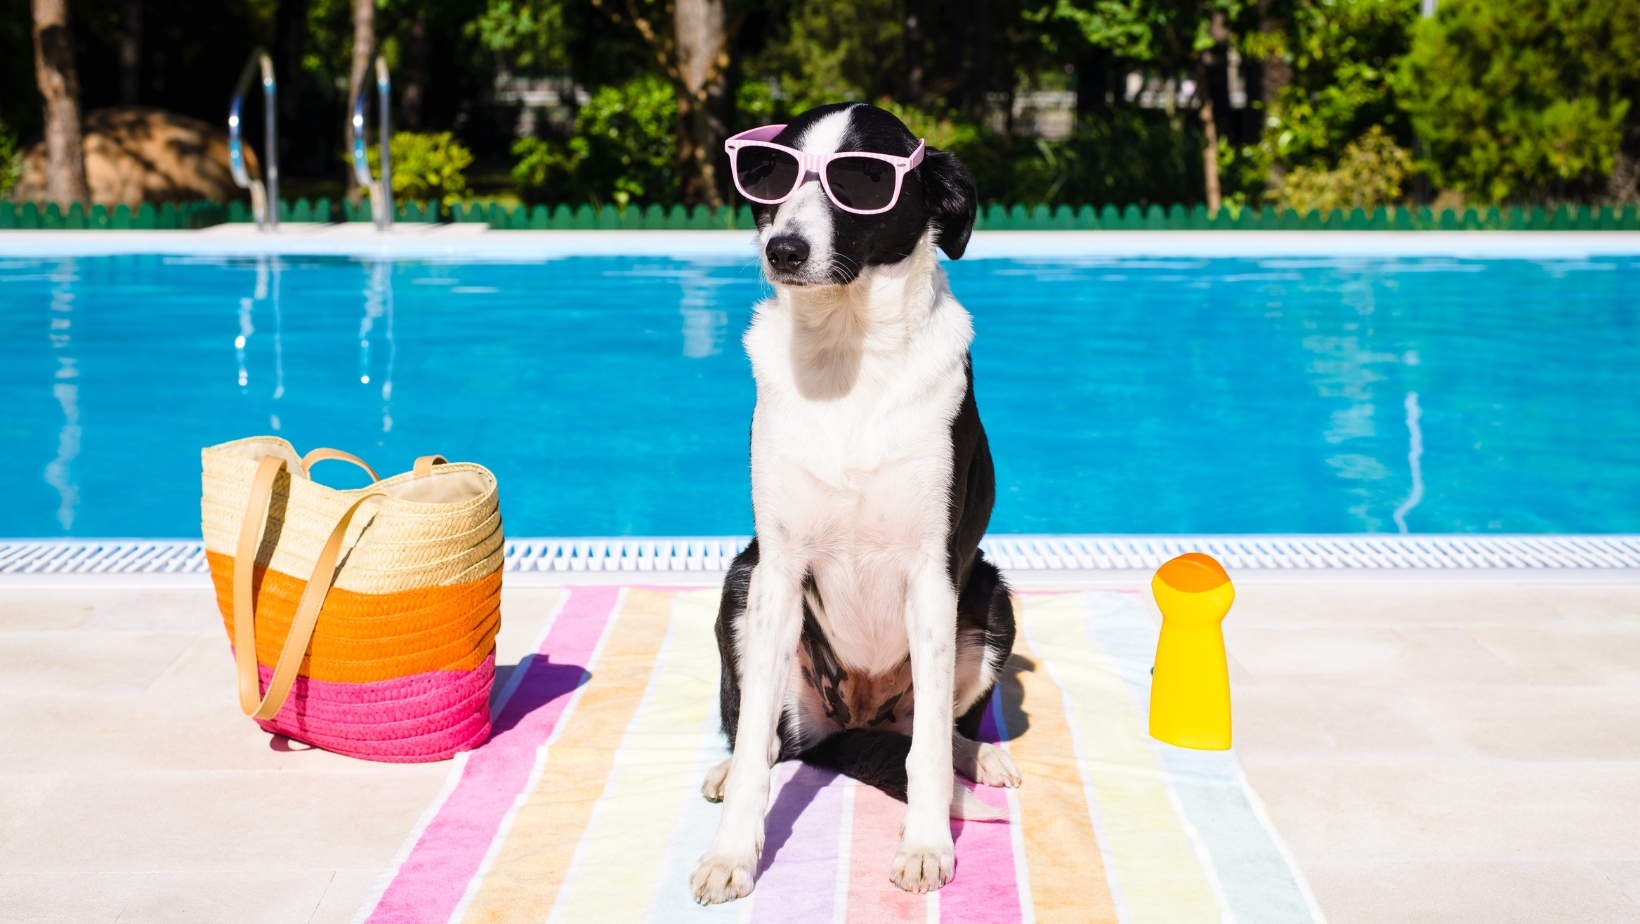 A Complete Guide To Pet Travel: What To Pack And 5 Must-Know Tips For Pet-Friendly Travel